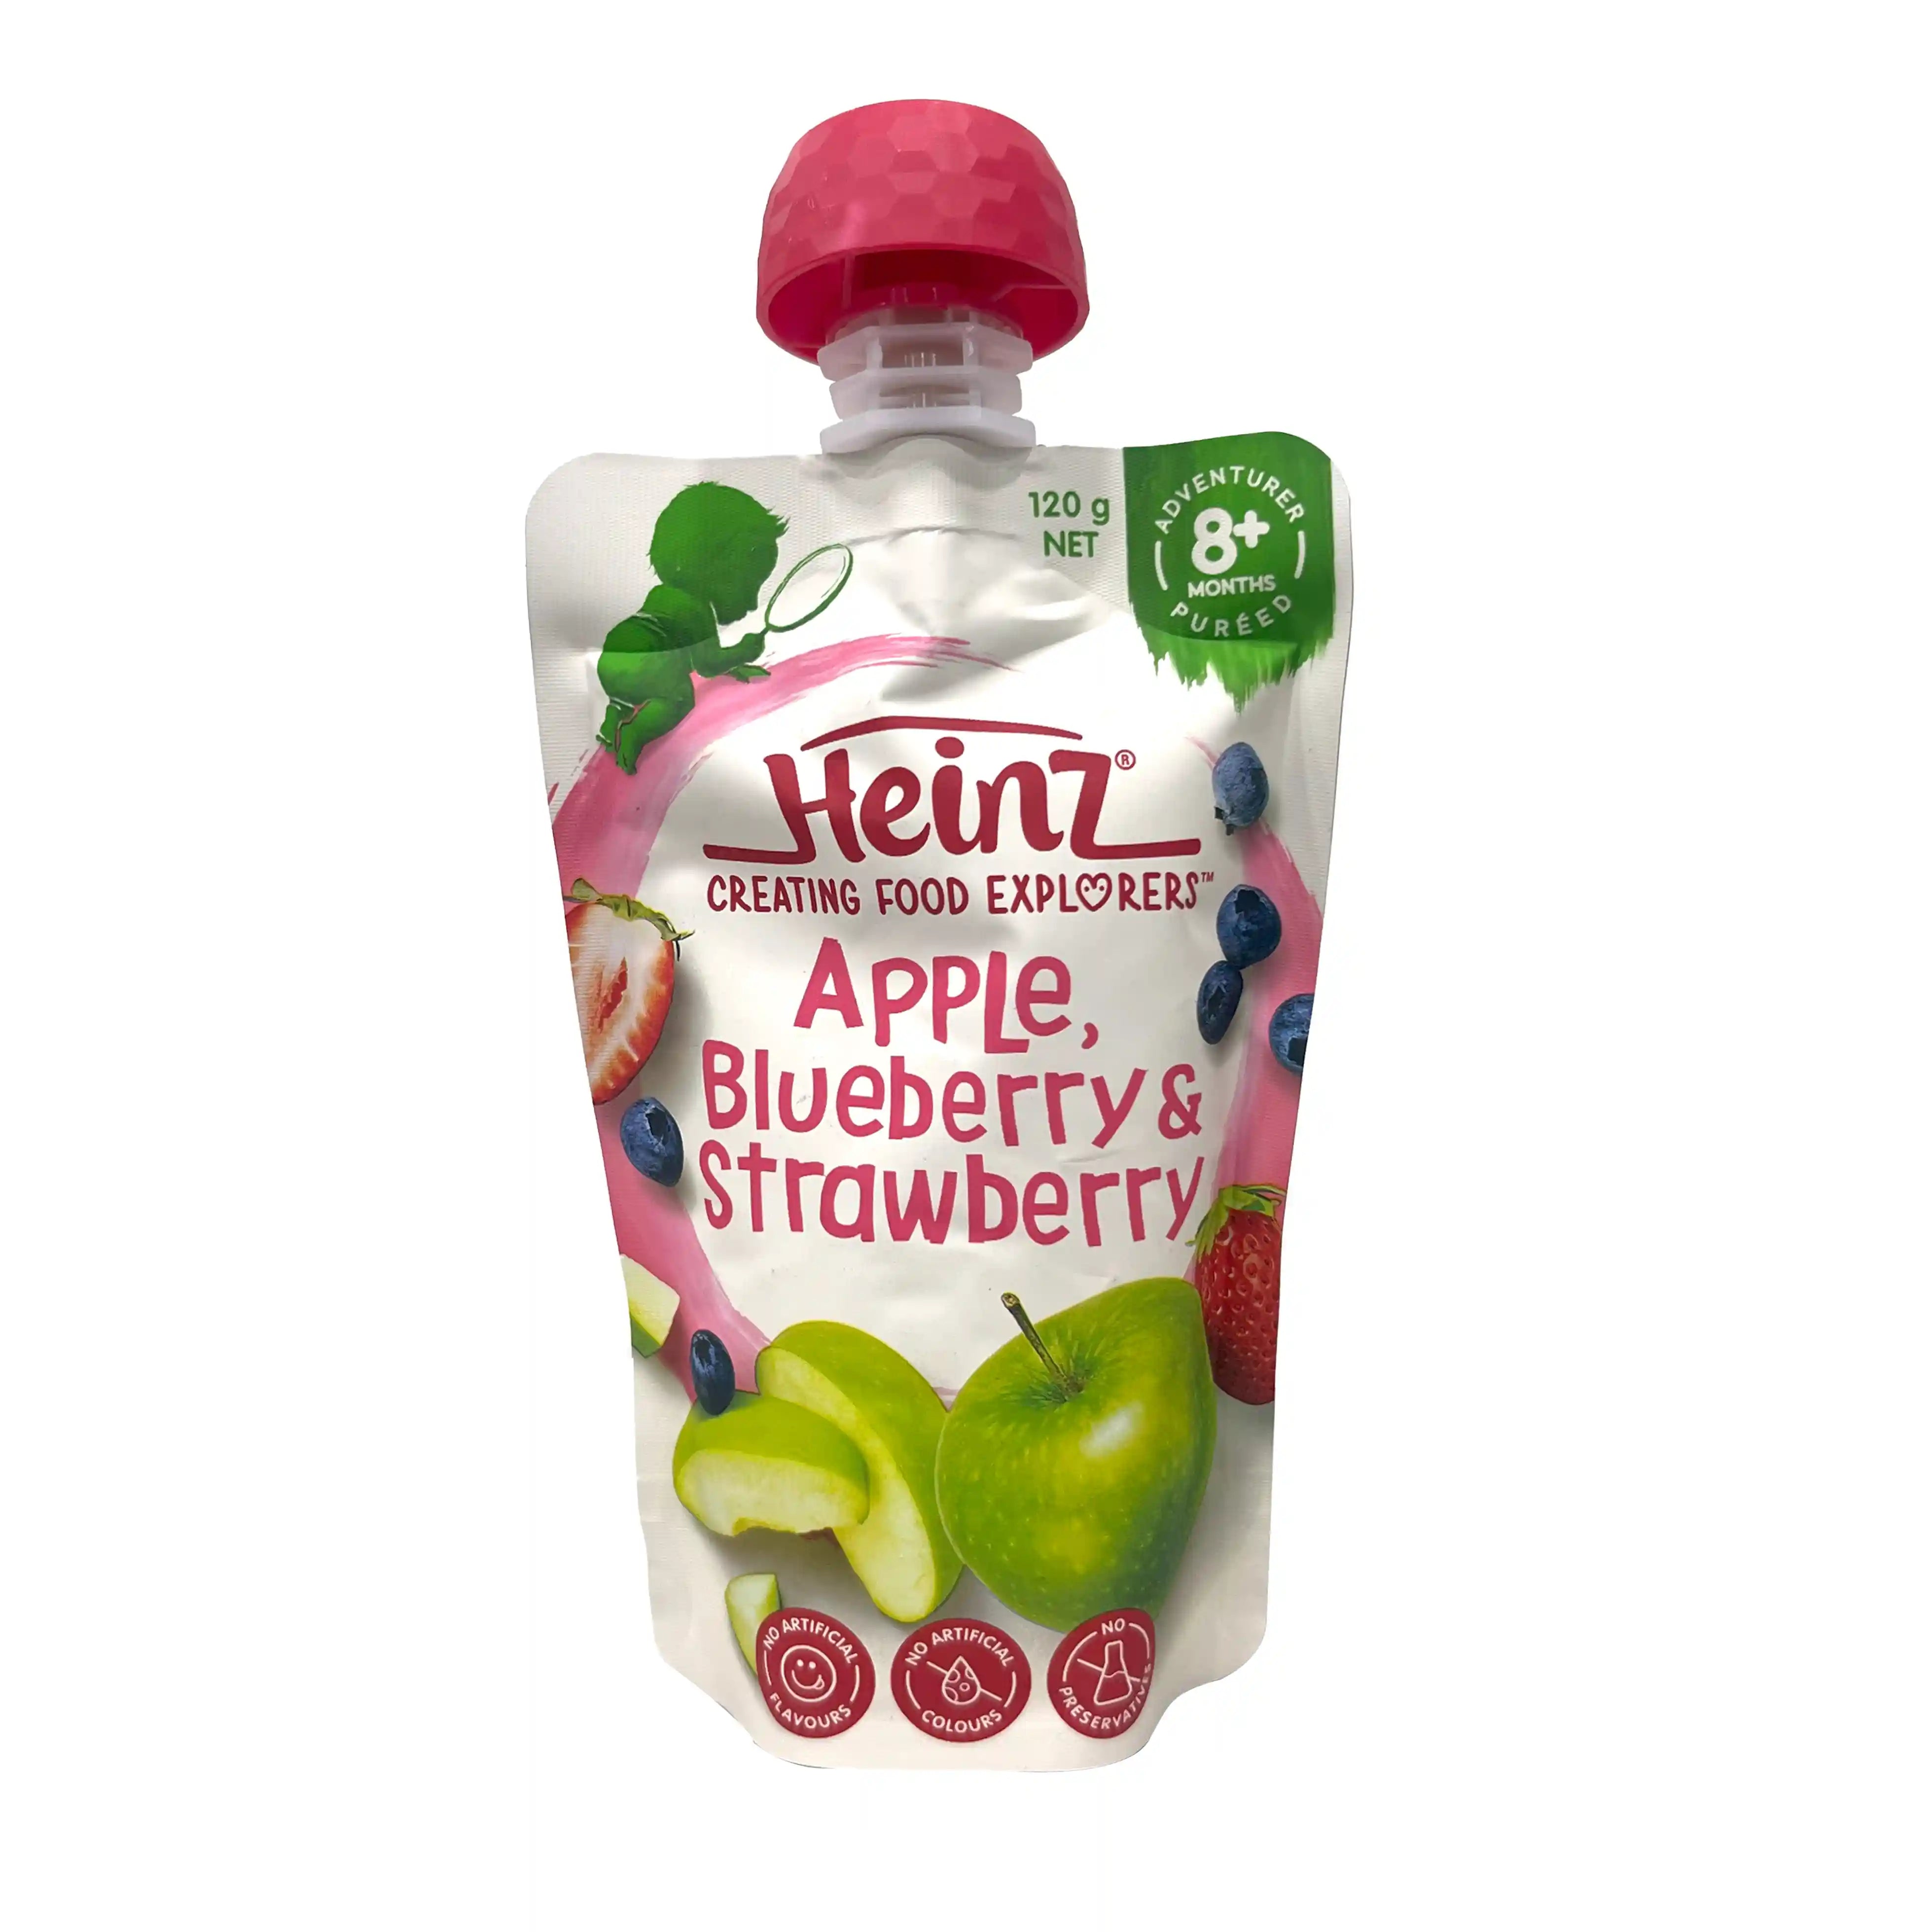 Buy Heinz Puree with Apple, Blueberry & Strawberry for your Baby, 8+months, 120gms Online in India at uyyaala.com